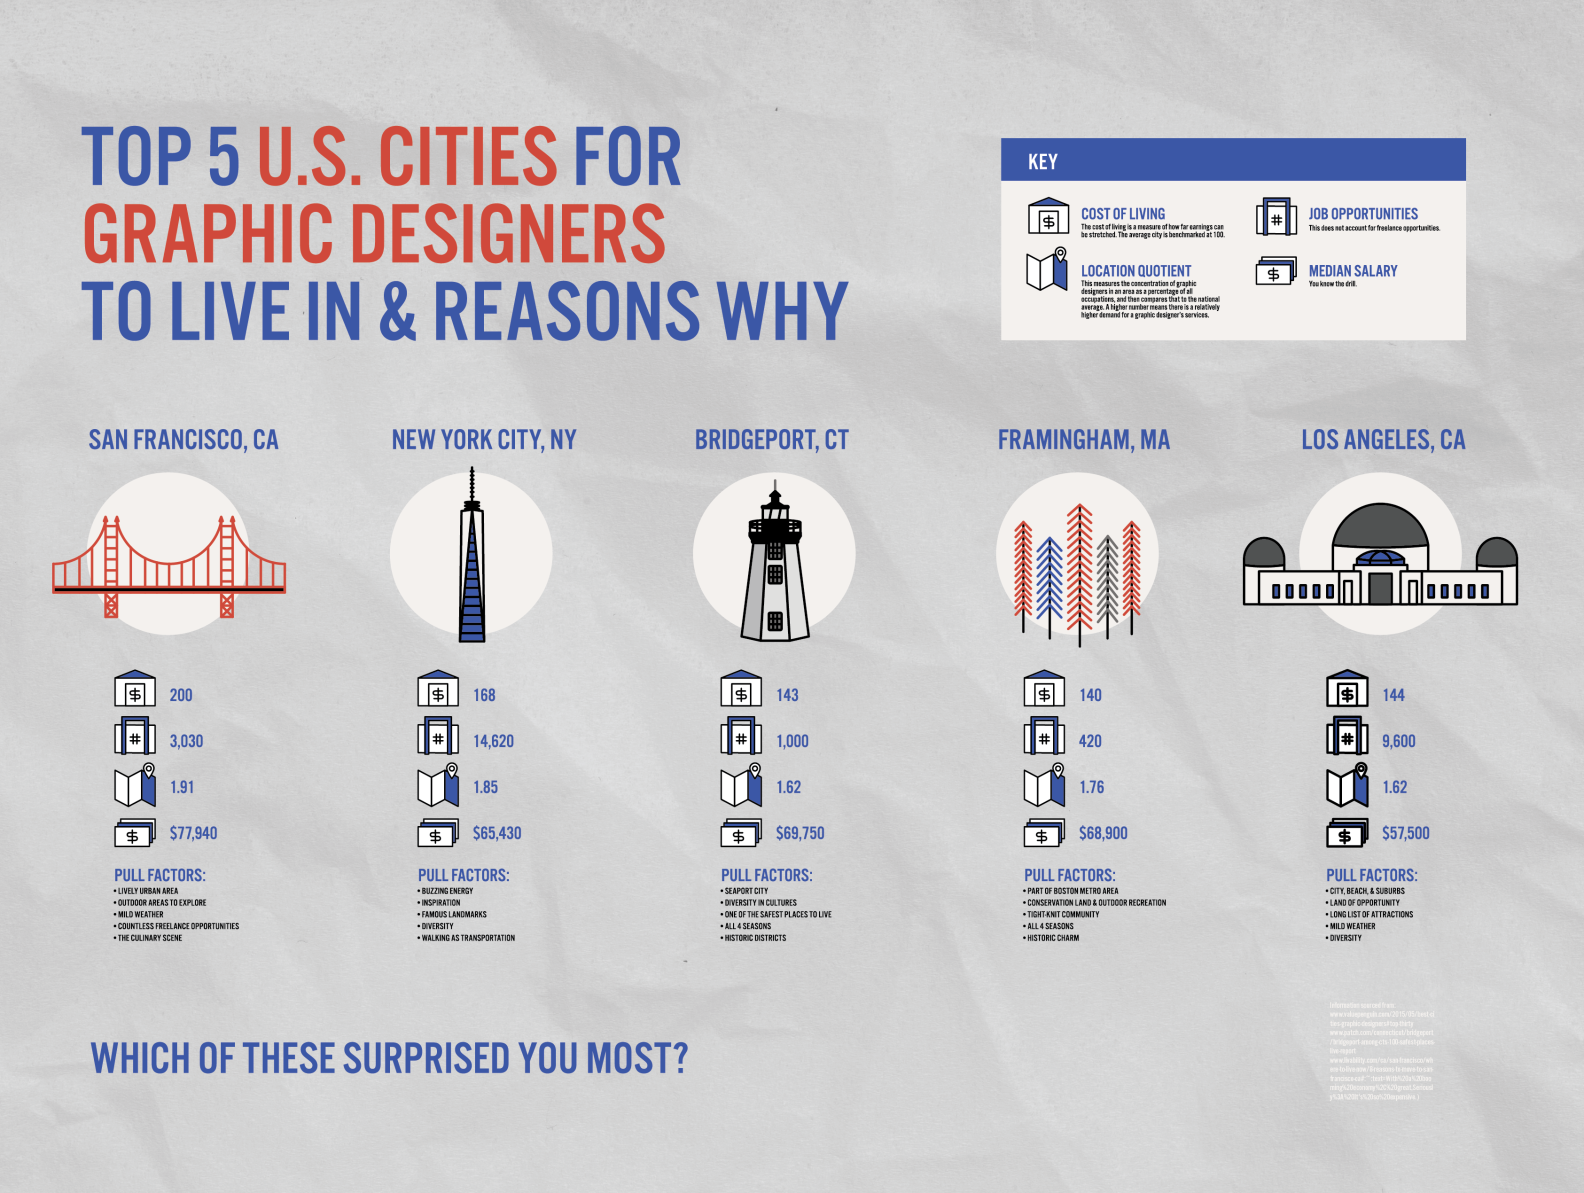 Infographic Top 5 U.S. Cities for Graphic Designers by Grace Frey on